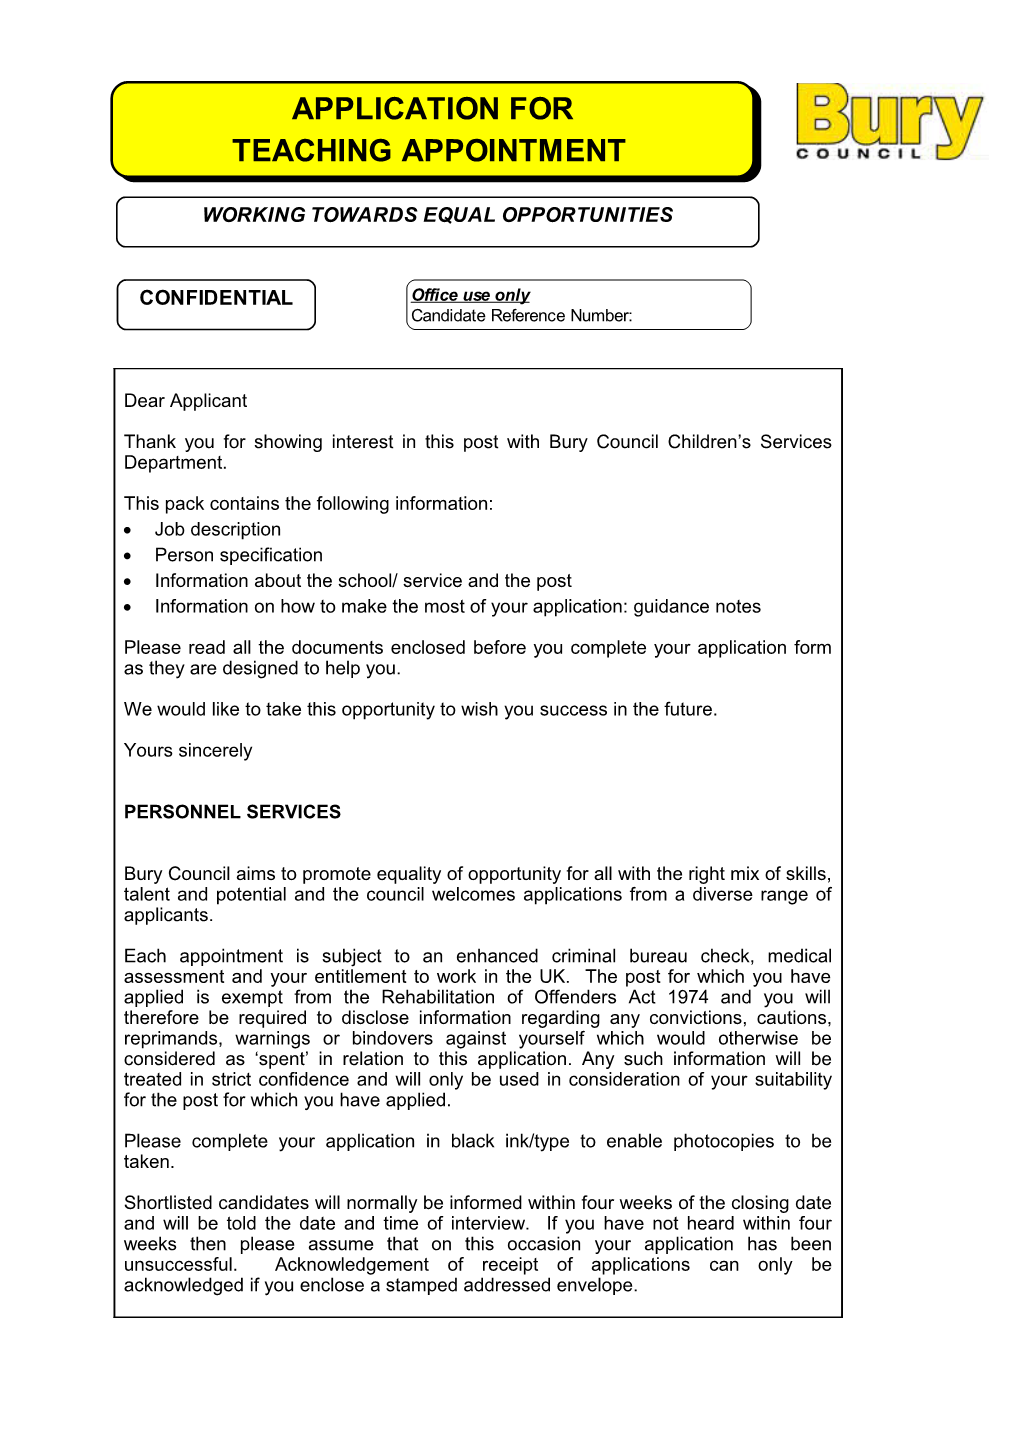 Application for Employment - Letter & Form